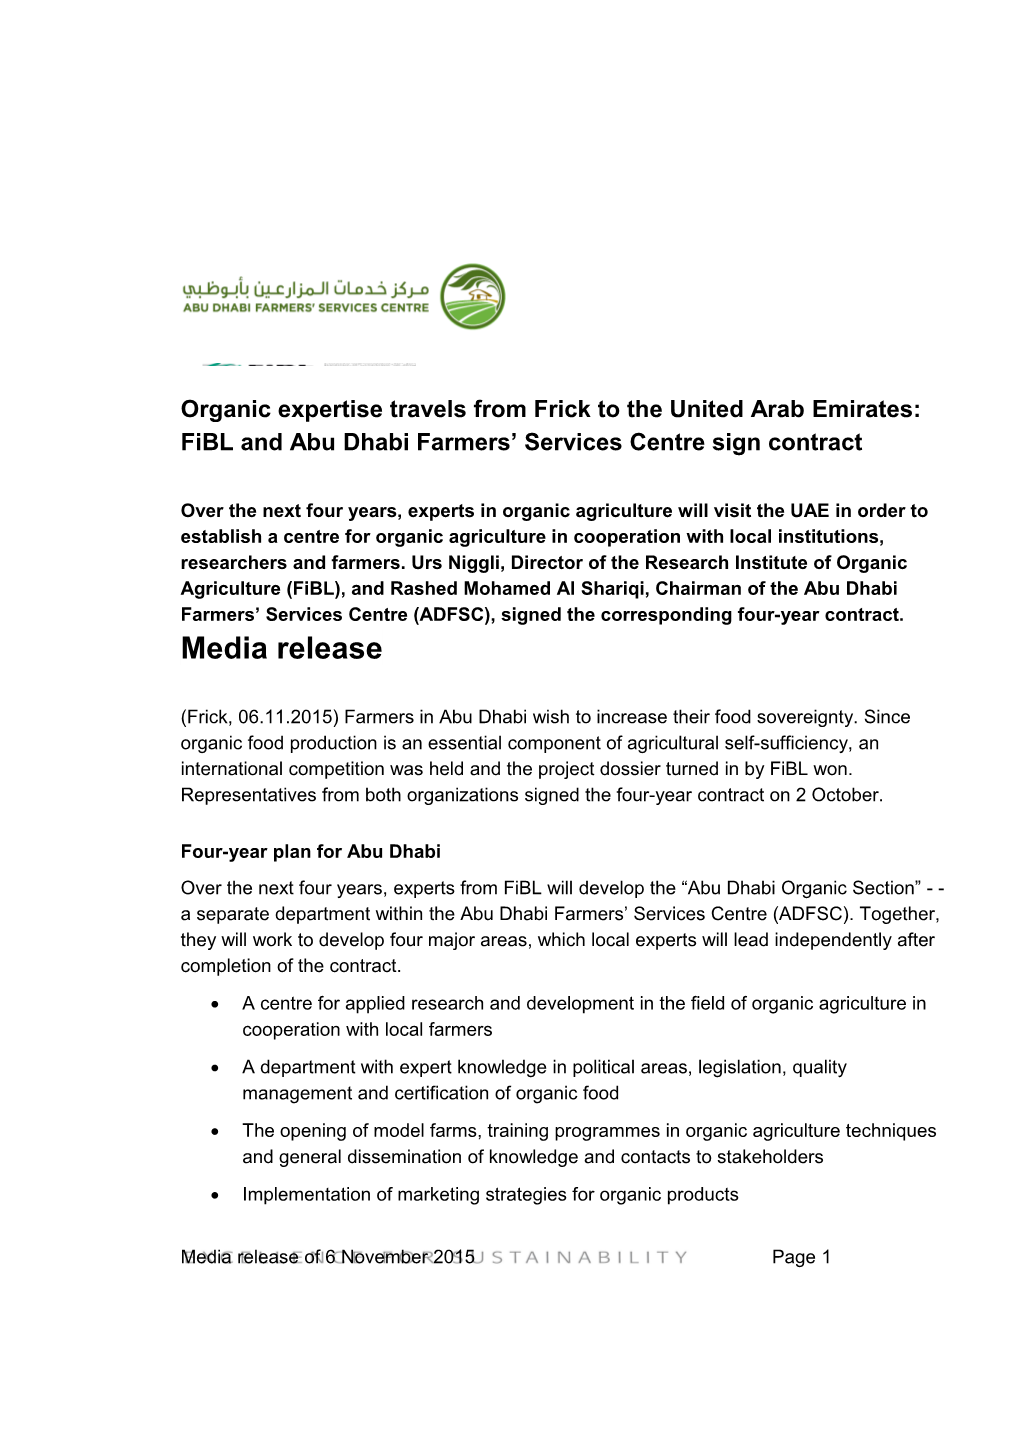 Organic Expertise Travels from Frick to the United Arab Emirates: Fibl and Abu Dhabi Farmers